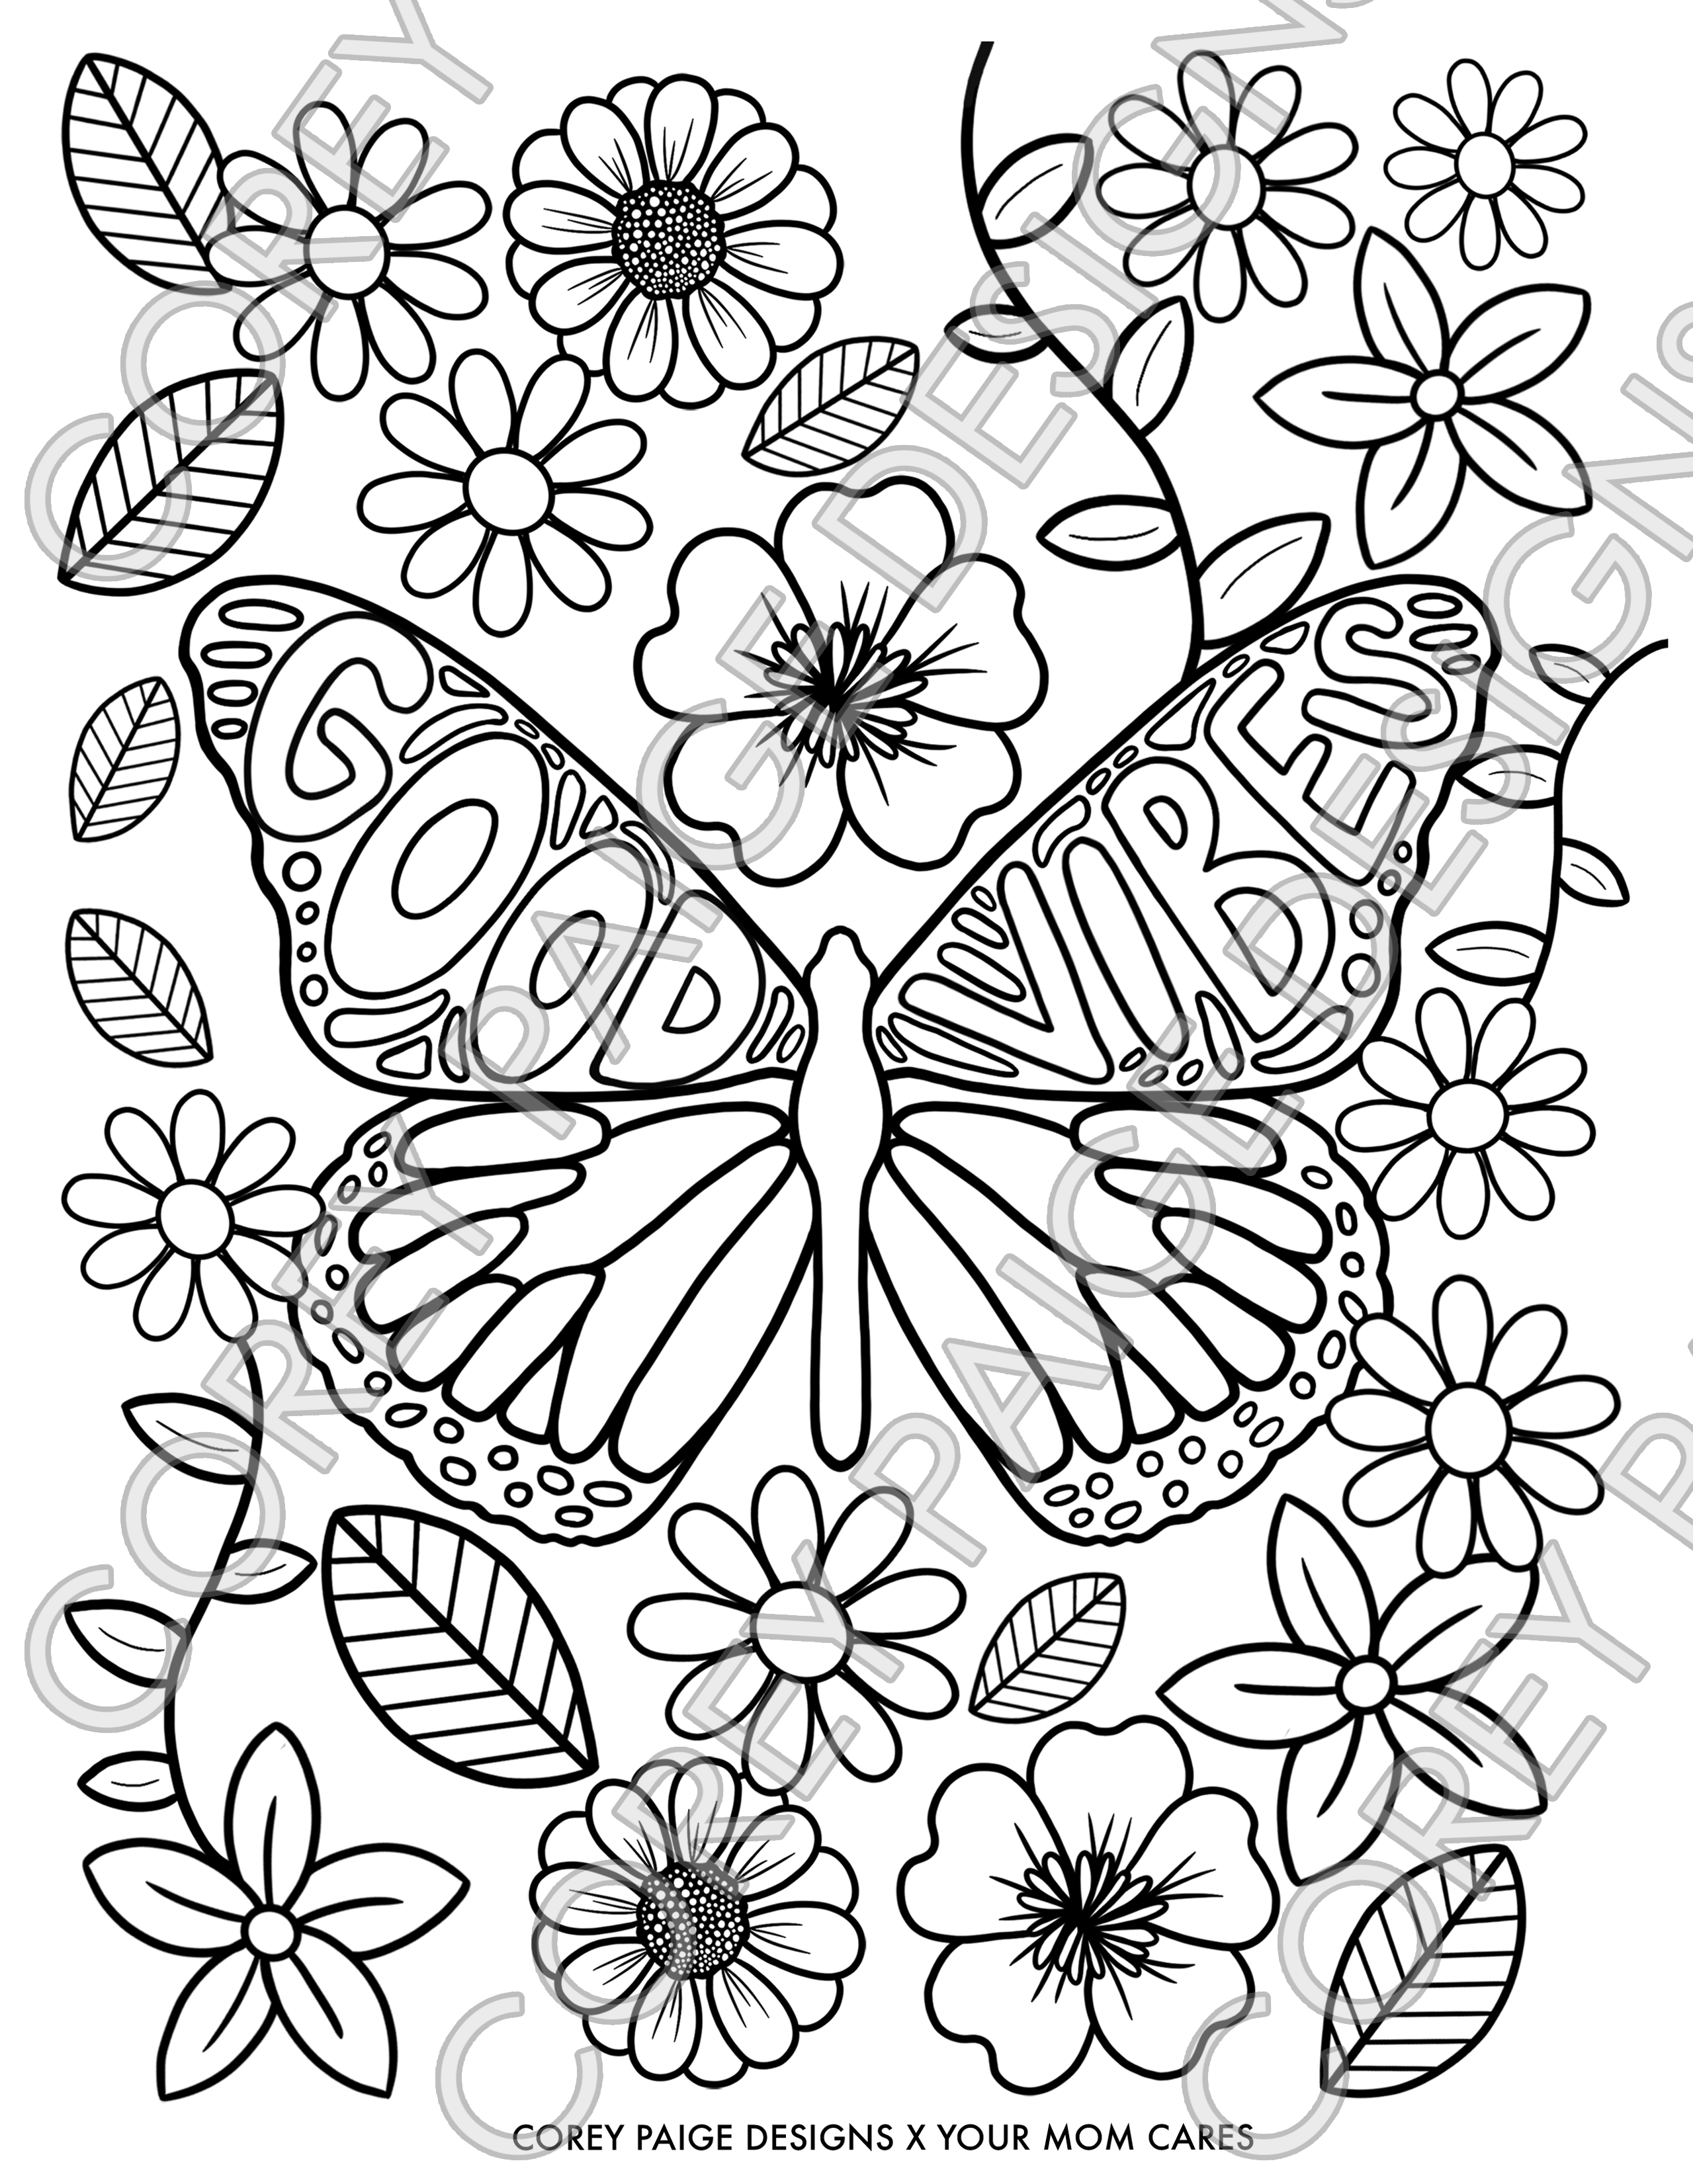 Good Vibes Butterfly Coloring Sheet – CoreyPaigeDesigns